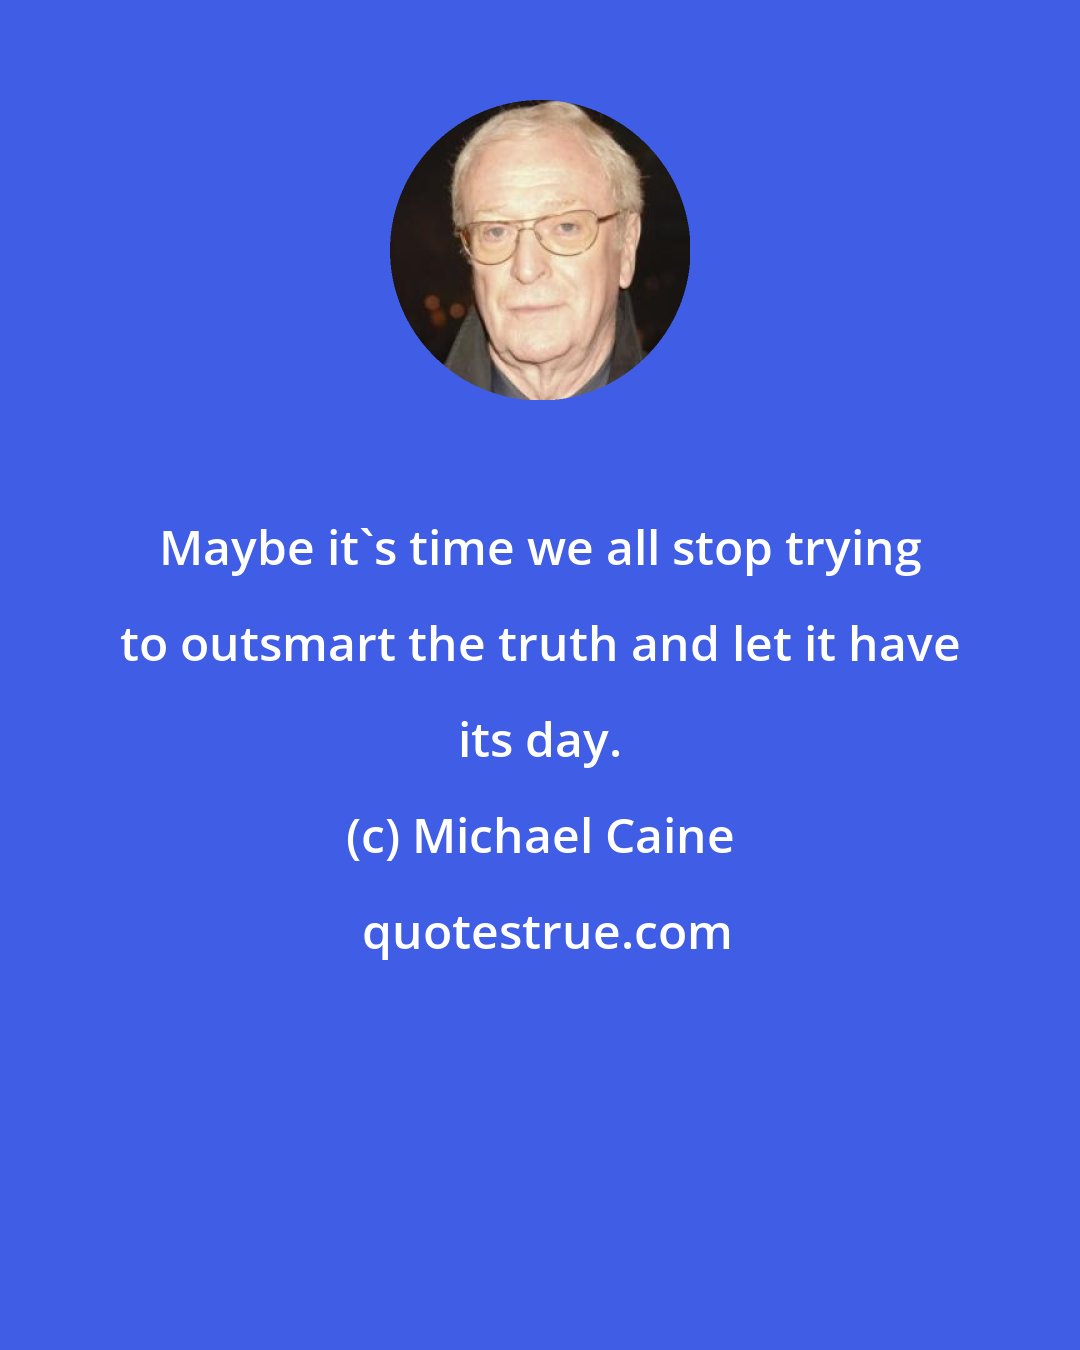 Michael Caine: Maybe it's time we all stop trying to outsmart the truth and let it have its day.